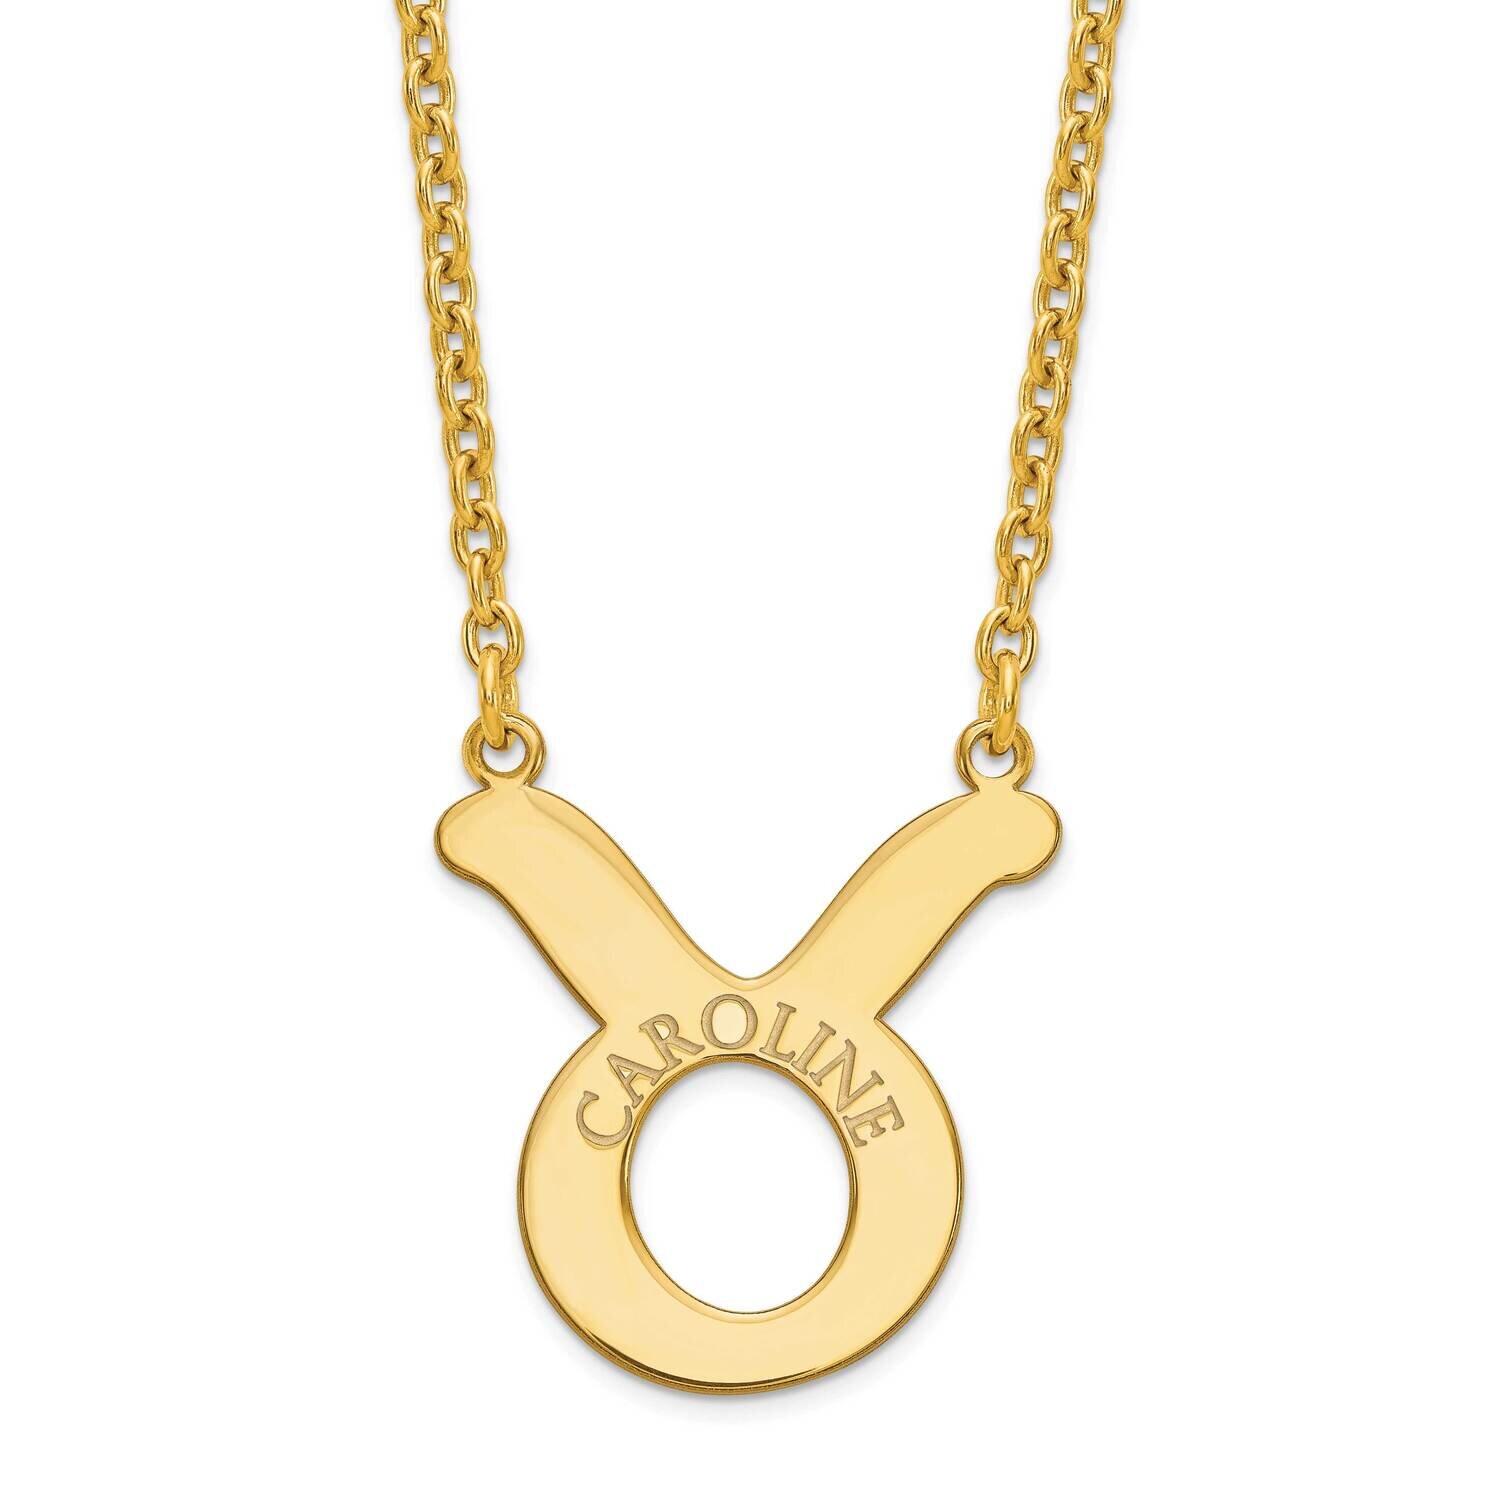 Taurus Zodiac Necklace Gold Plated Sterling Silver XNA744GP